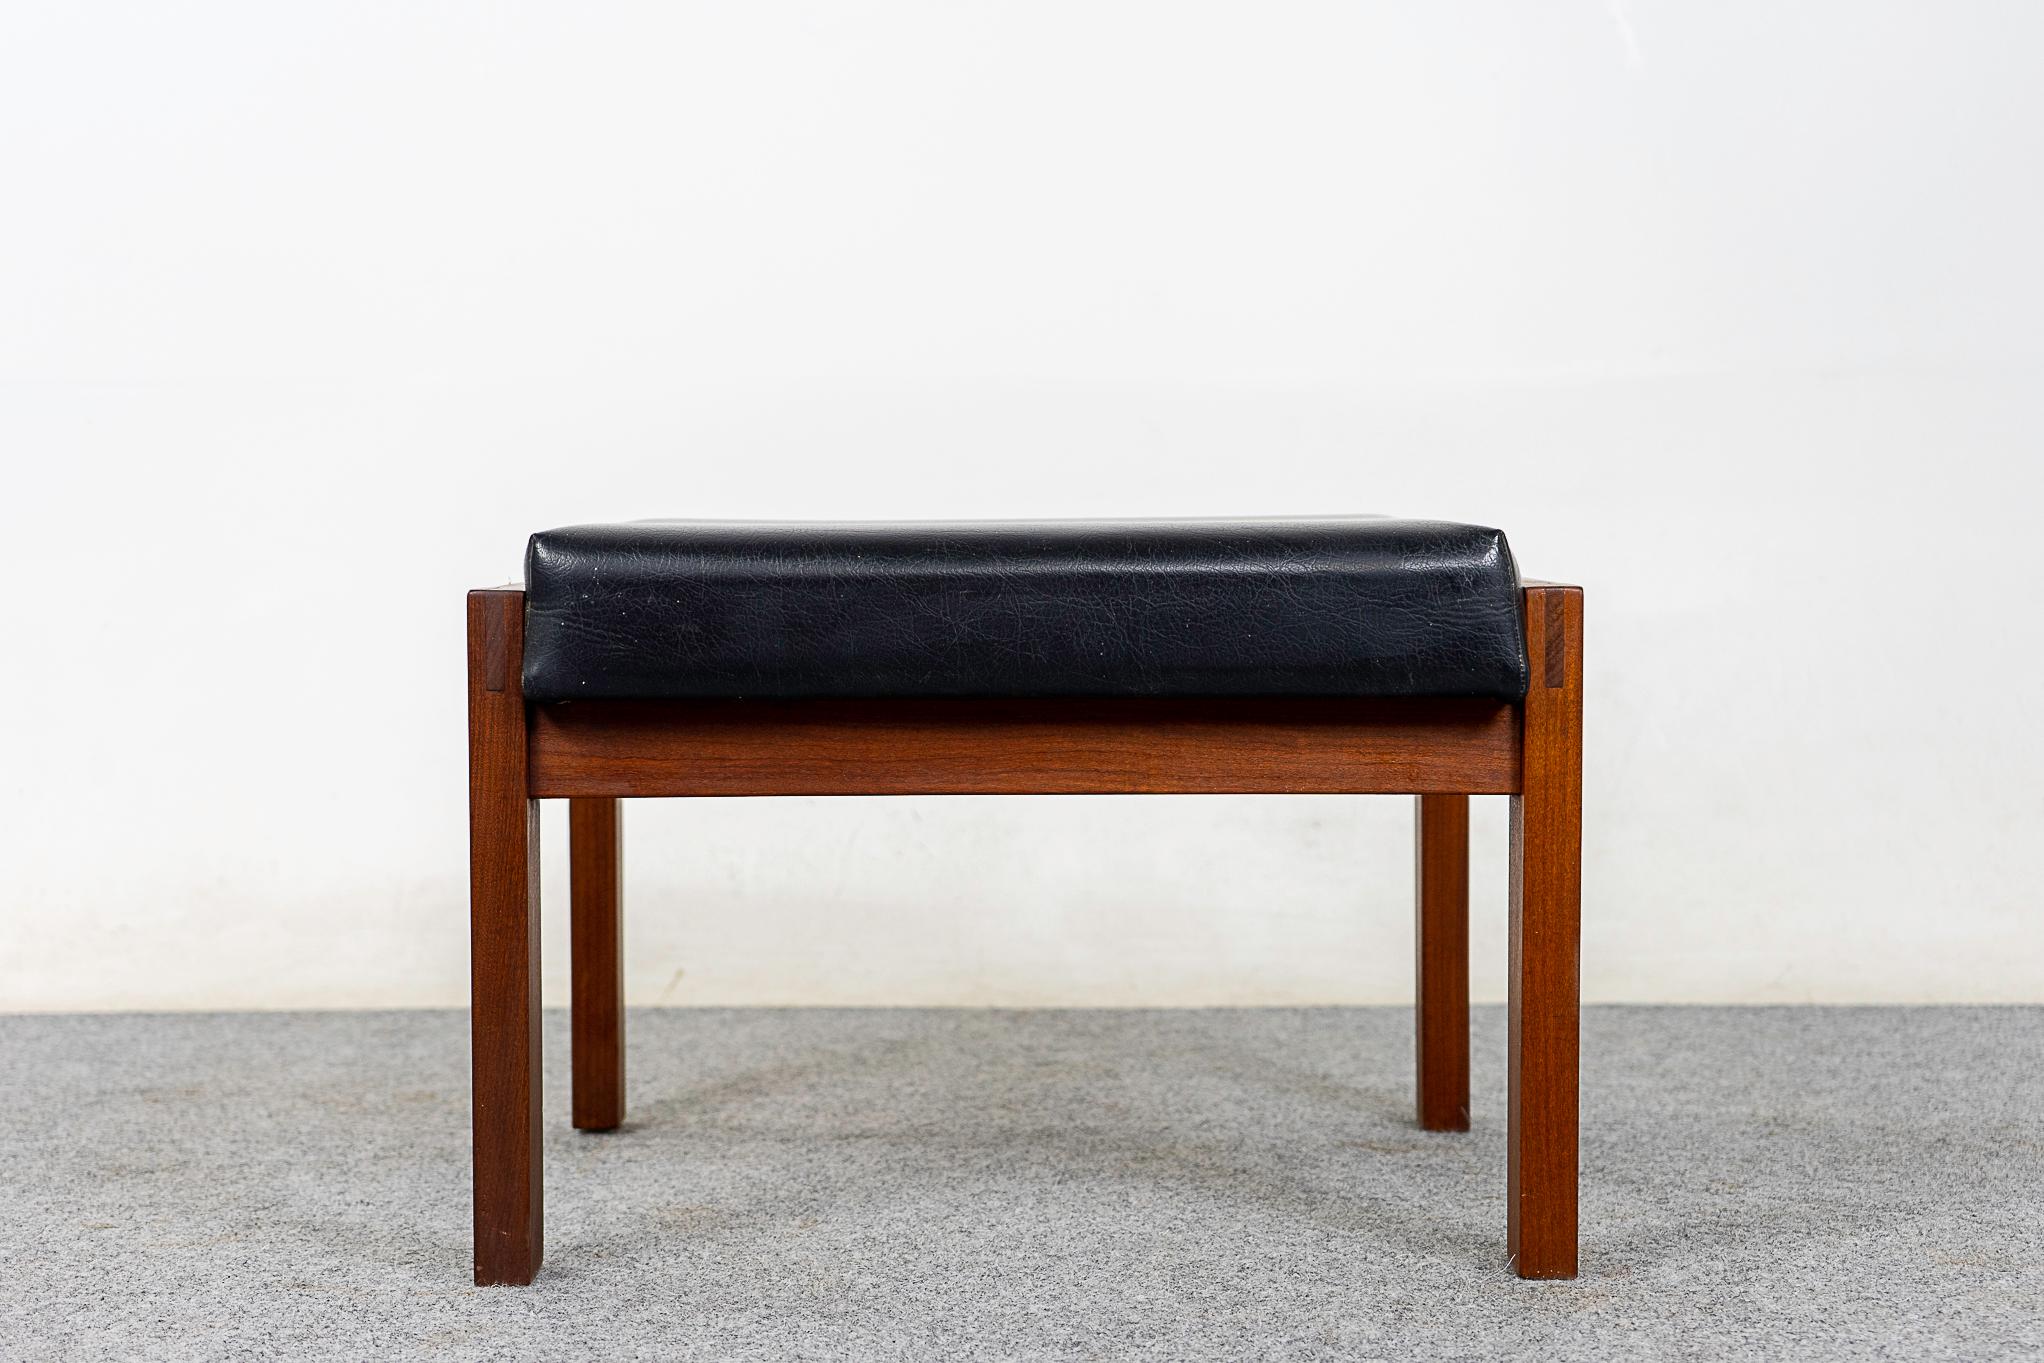 Teak Danish footstool, circa 1960's. Robust frame with unique joinery and lovely deep tone contrasts nicely with the original upholstery in nice condition.